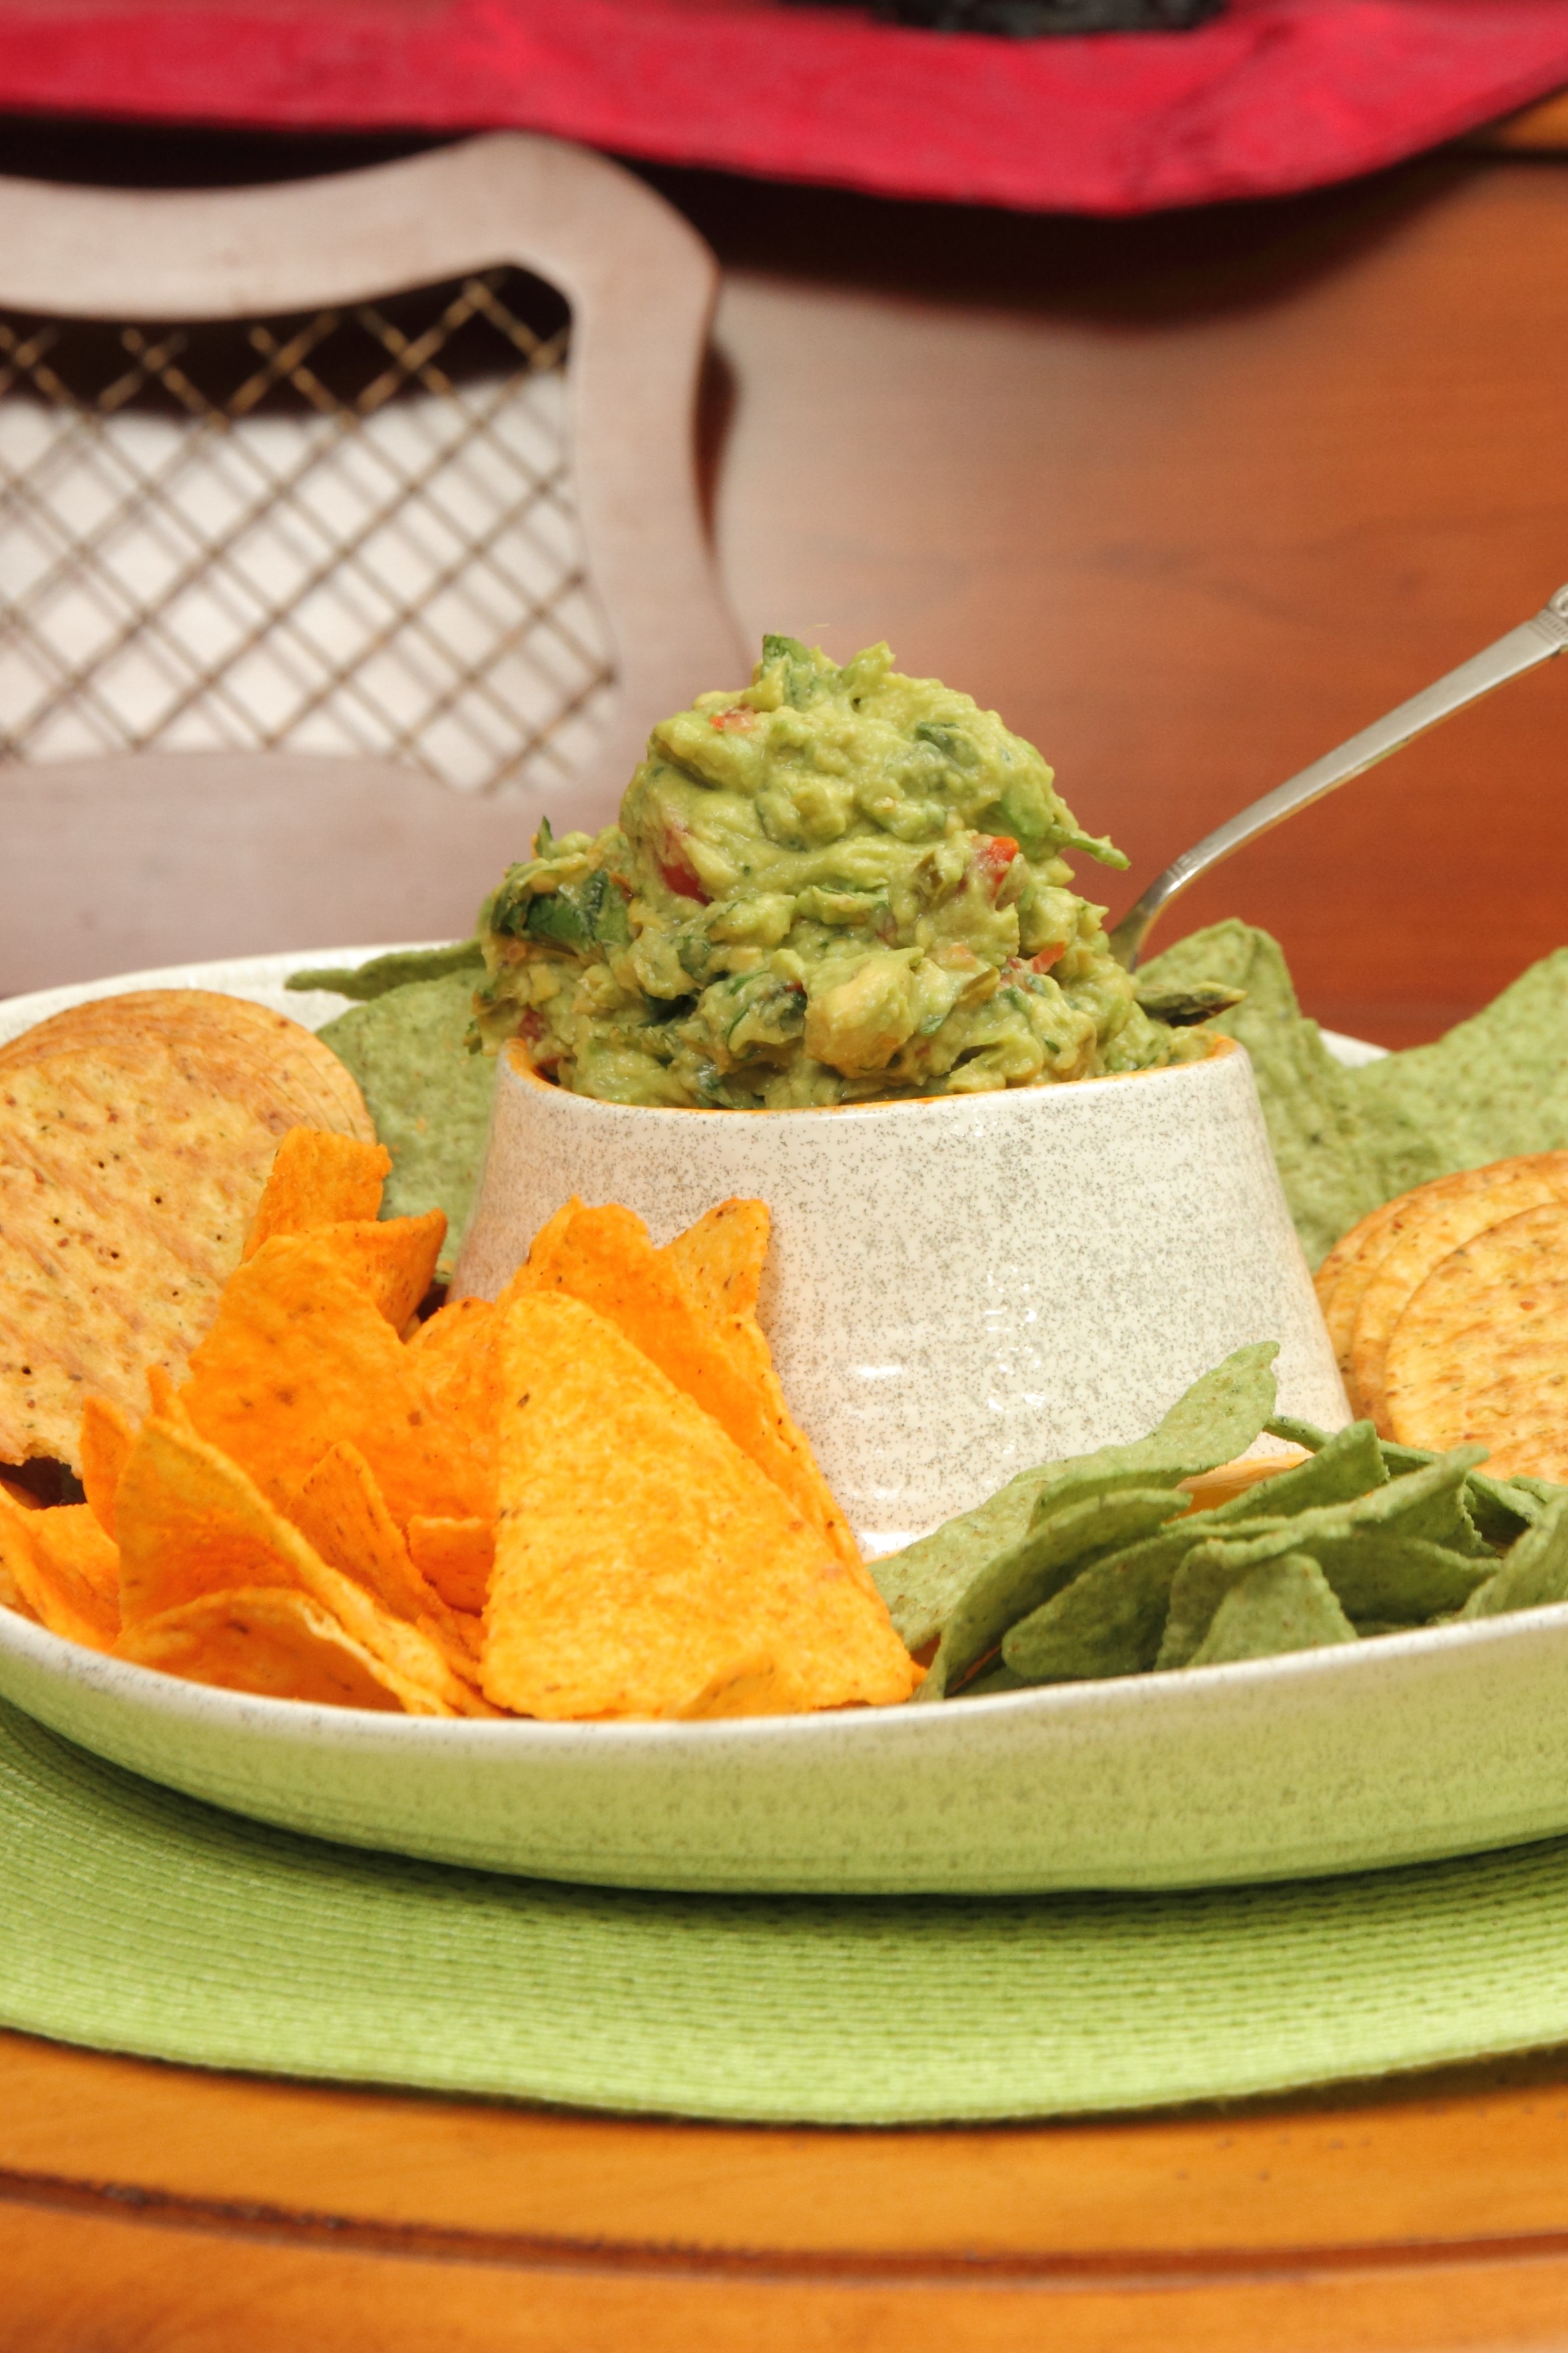 A plate of chips and guacamole on the table.